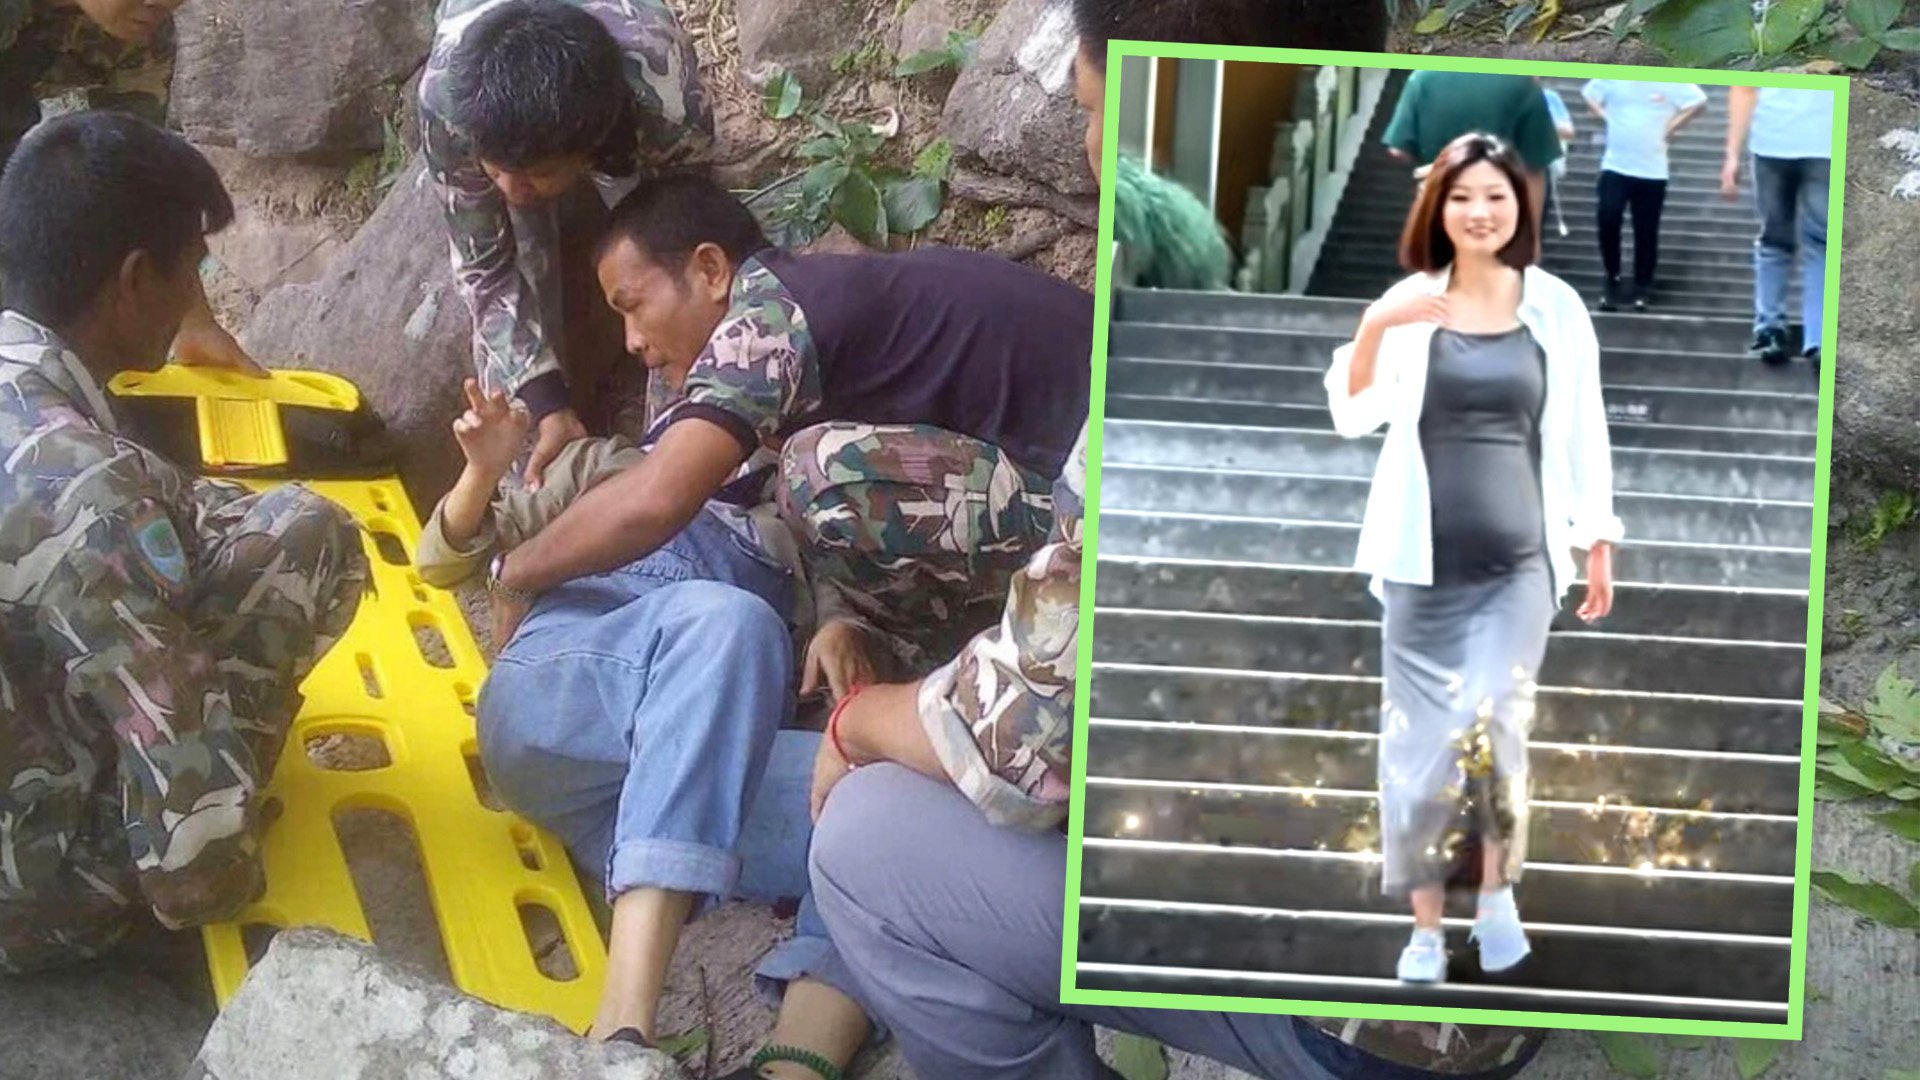 A woman from China who lost the baby she was carrying when her husband pushed her off a cliff in Thailand five years ago has delighted social media by announcing that she is pregnant again. Photo: SCMP composite/Douyin/Royal Thai Police